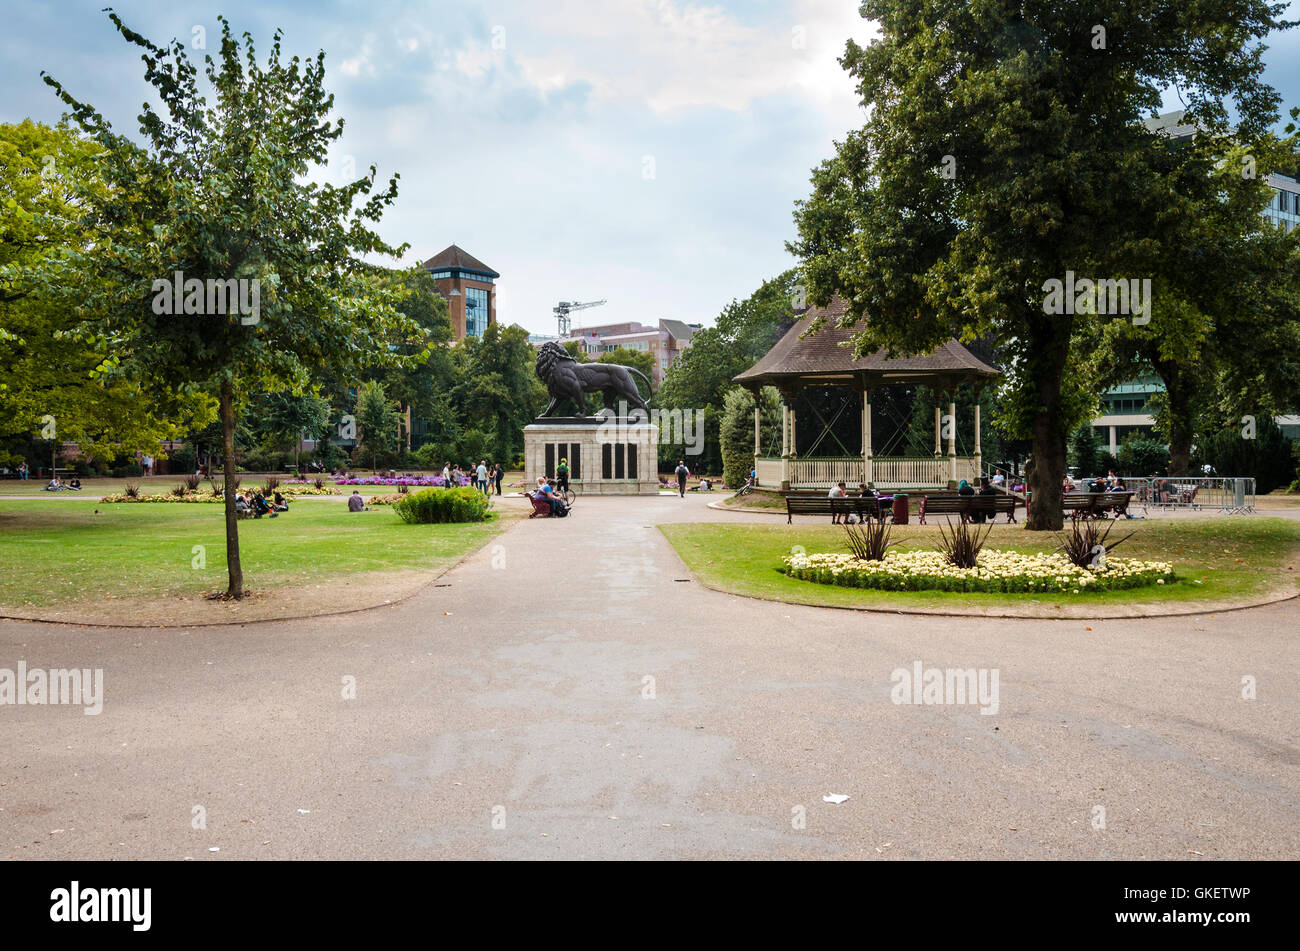 A view looking across Forbury Gardens in Reading, UK Stock Photo